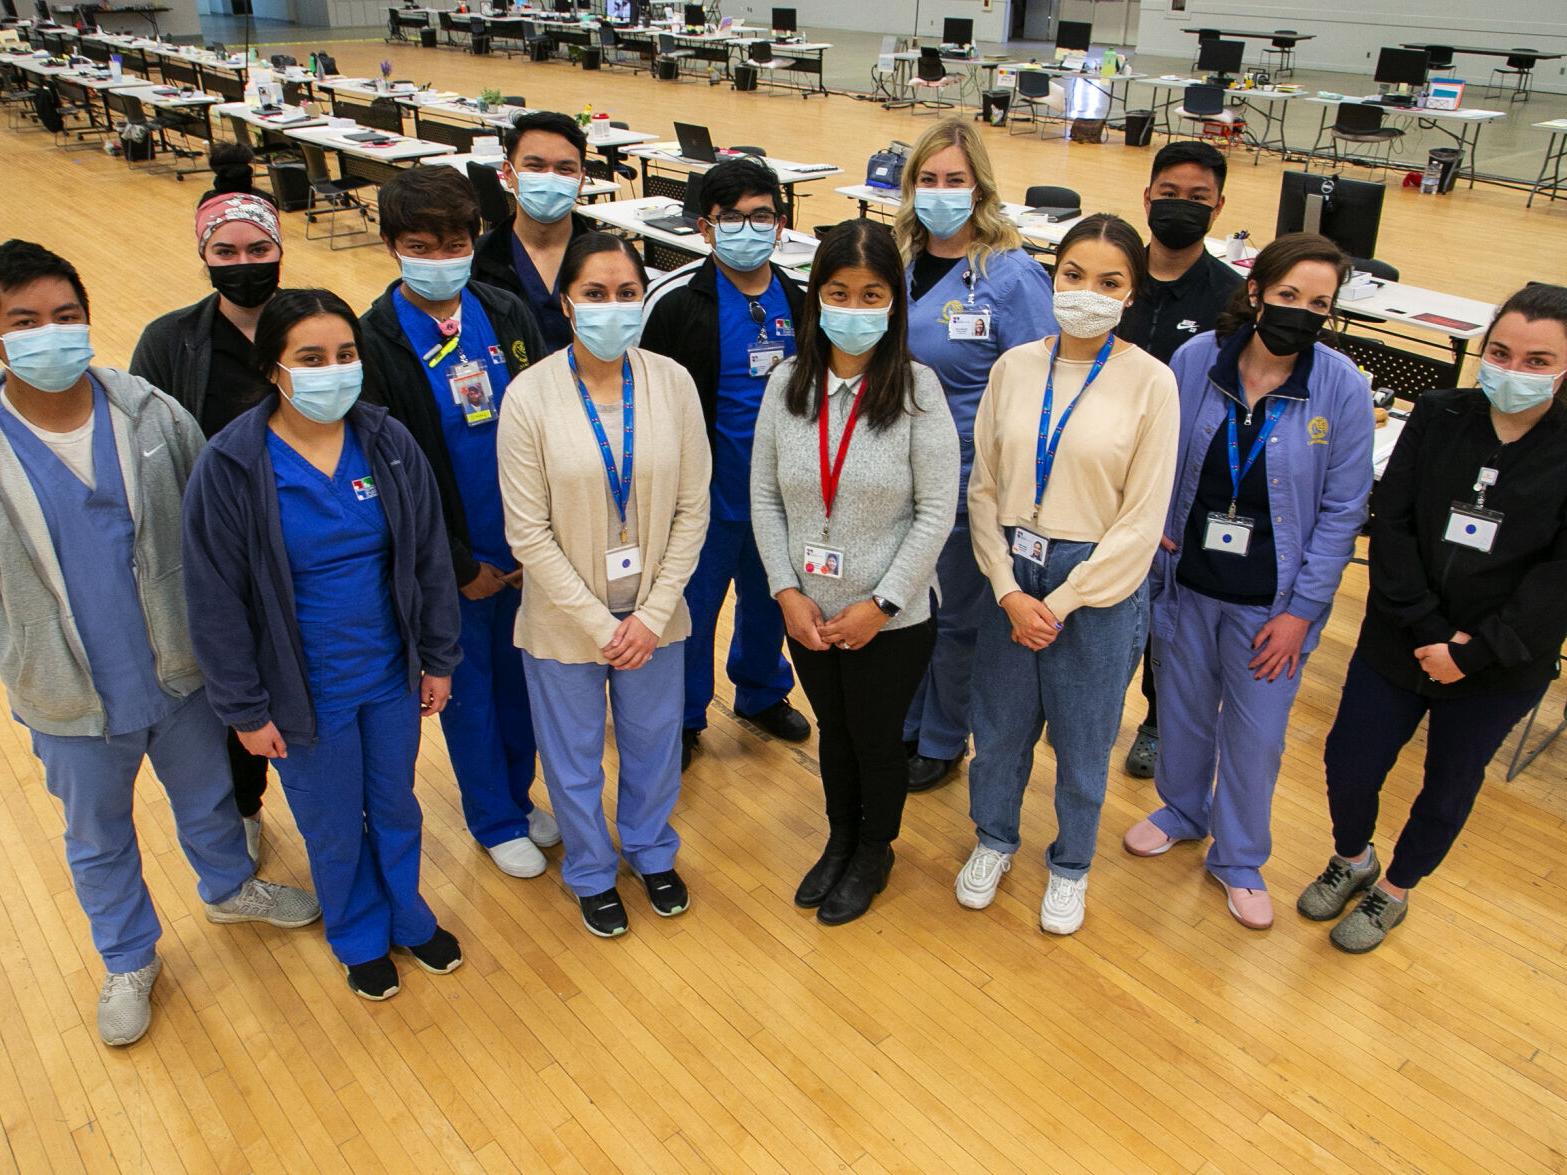 We feel that it is our duty': CSUB nursing students lend big assist to  county's COVID-19 contact tracing efforts | News | bakersfield.com